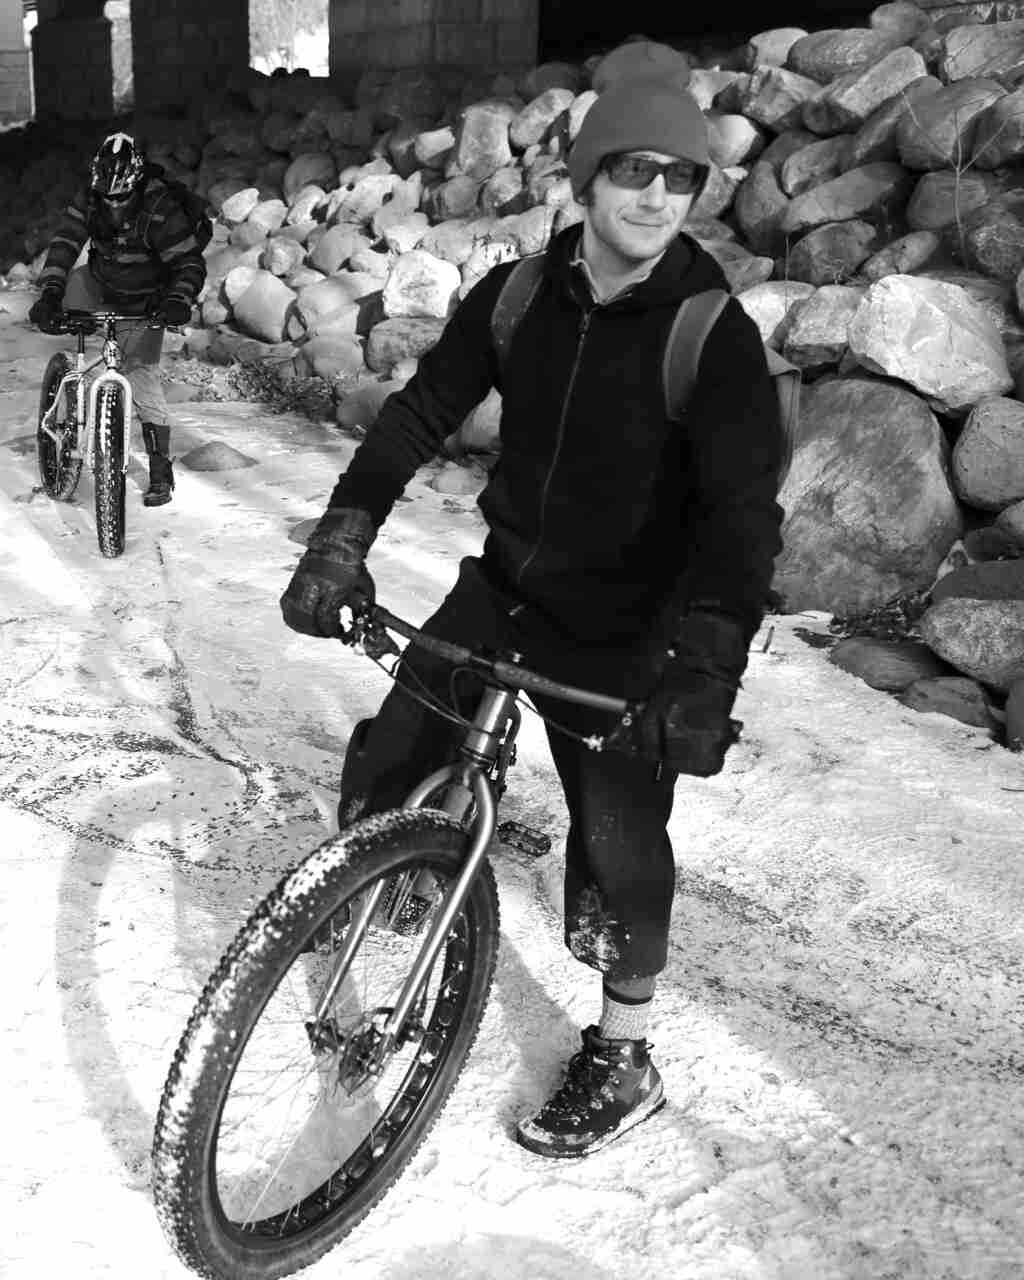 Front view of a cyclist, standing with their Surly bike on snow, with a pile of rocks behind - black & white image